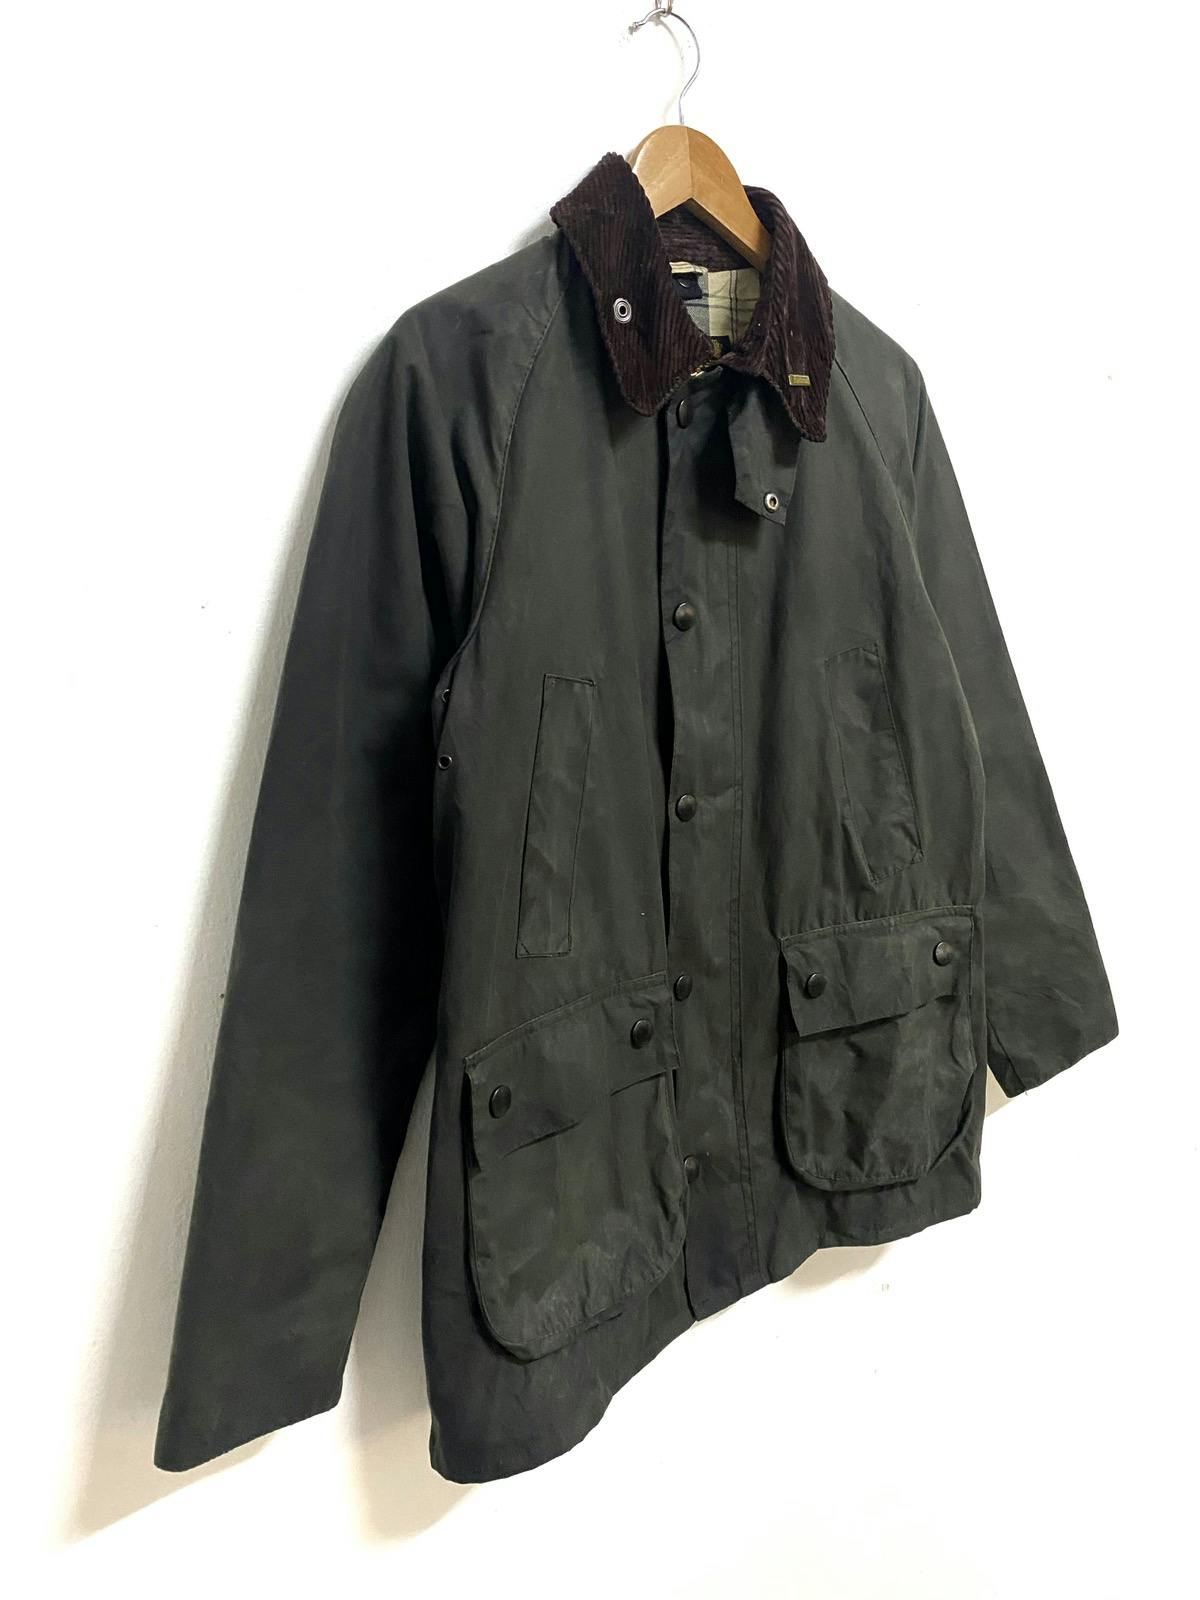 Barbour Classic Bedale AW19 Wax Jacket Made in England - 5